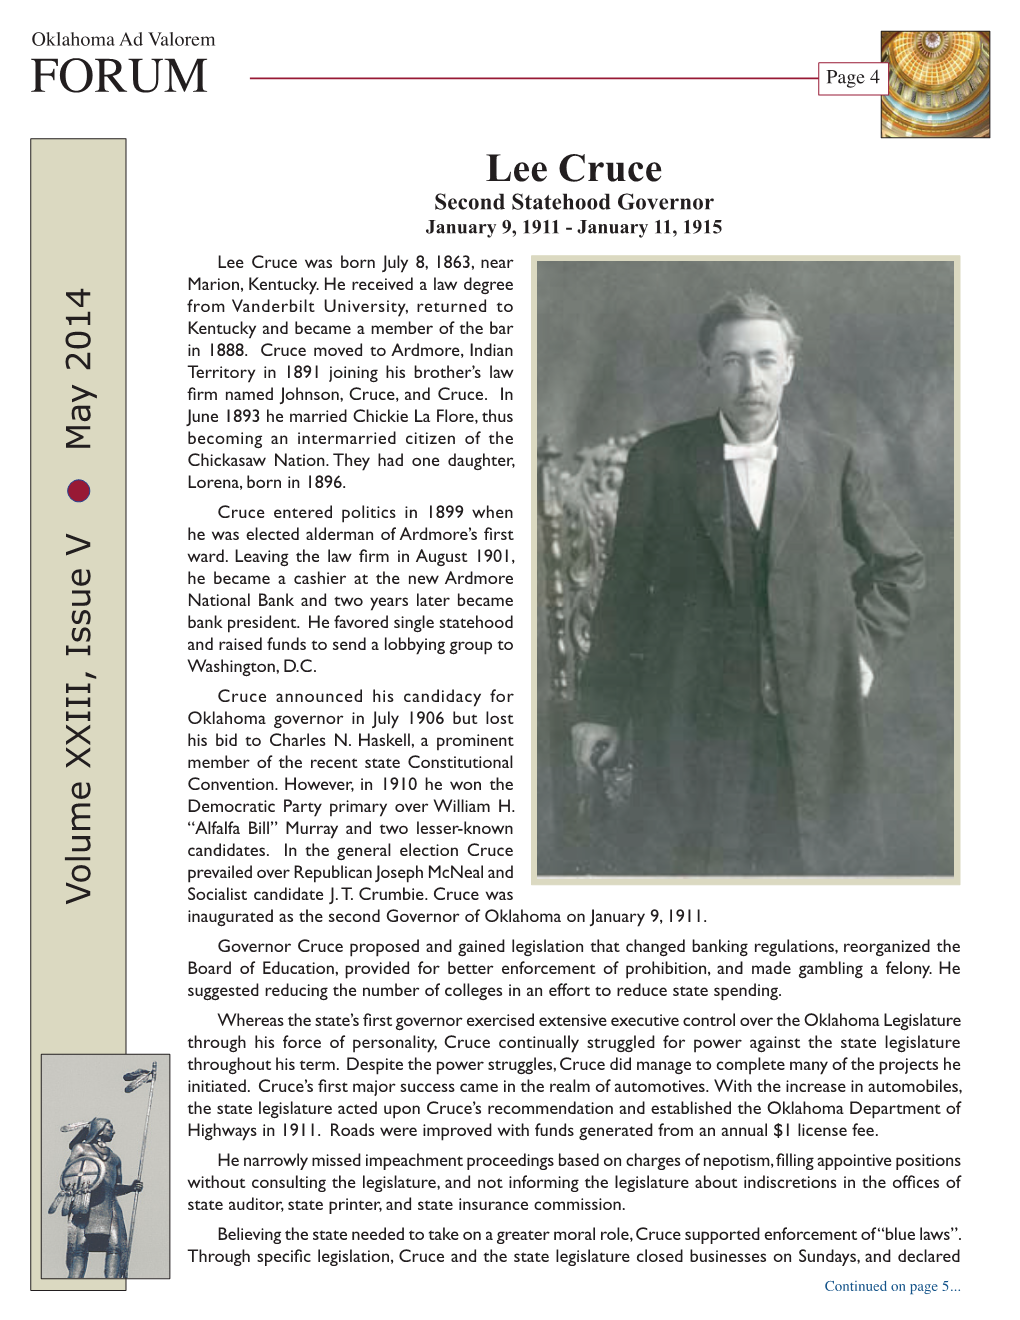 Lee Cruce Second Statehood Governor January 9, 1911 - January 11, 1915 Lee Cruce Was Born July 8, 1863, Near Marion, Kentucky